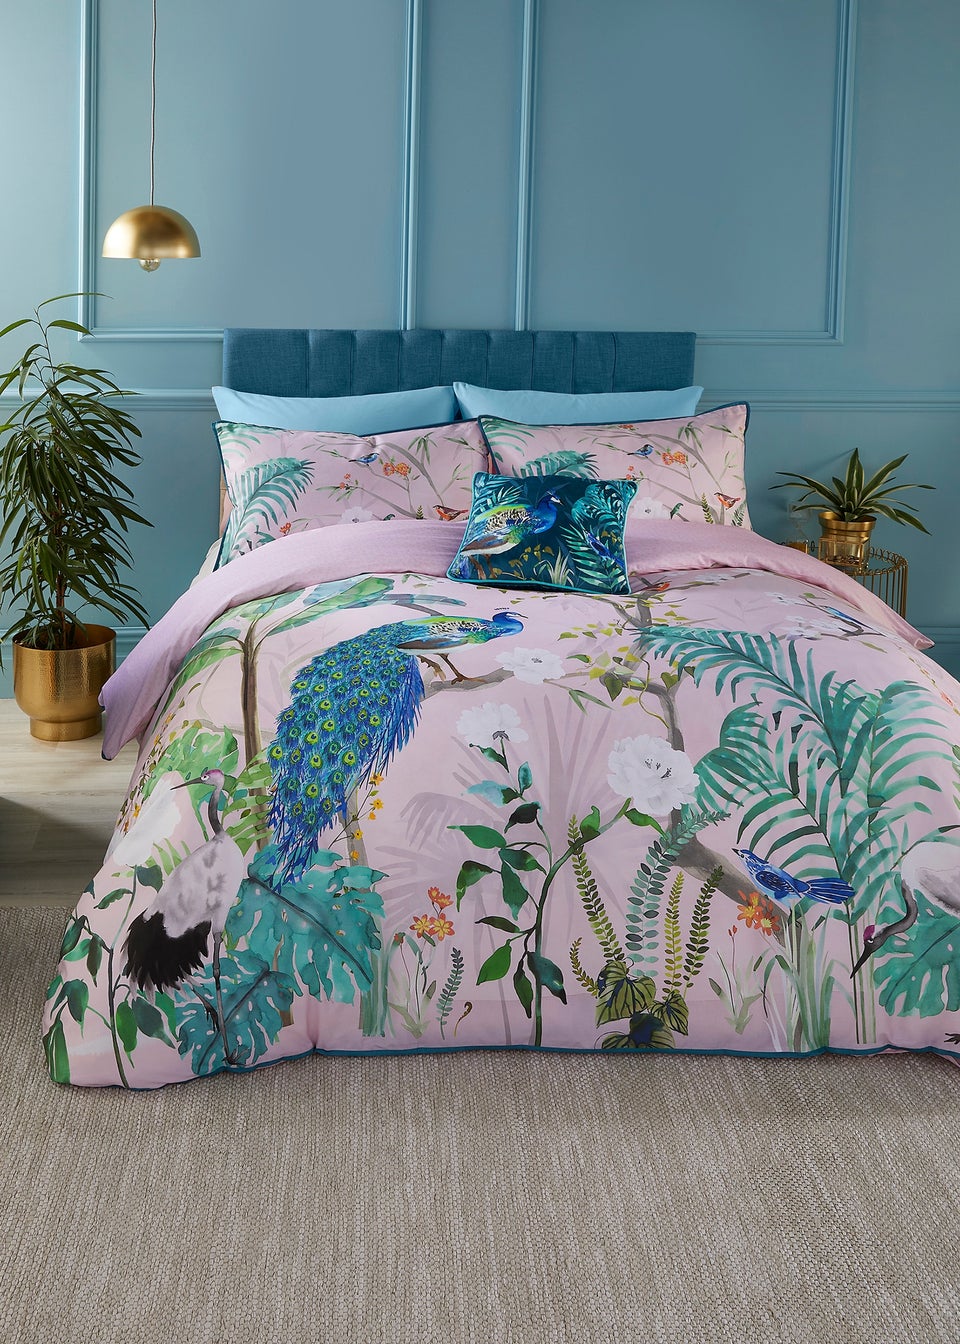 Soiree Pink Peacock Jungle Duvet Cover